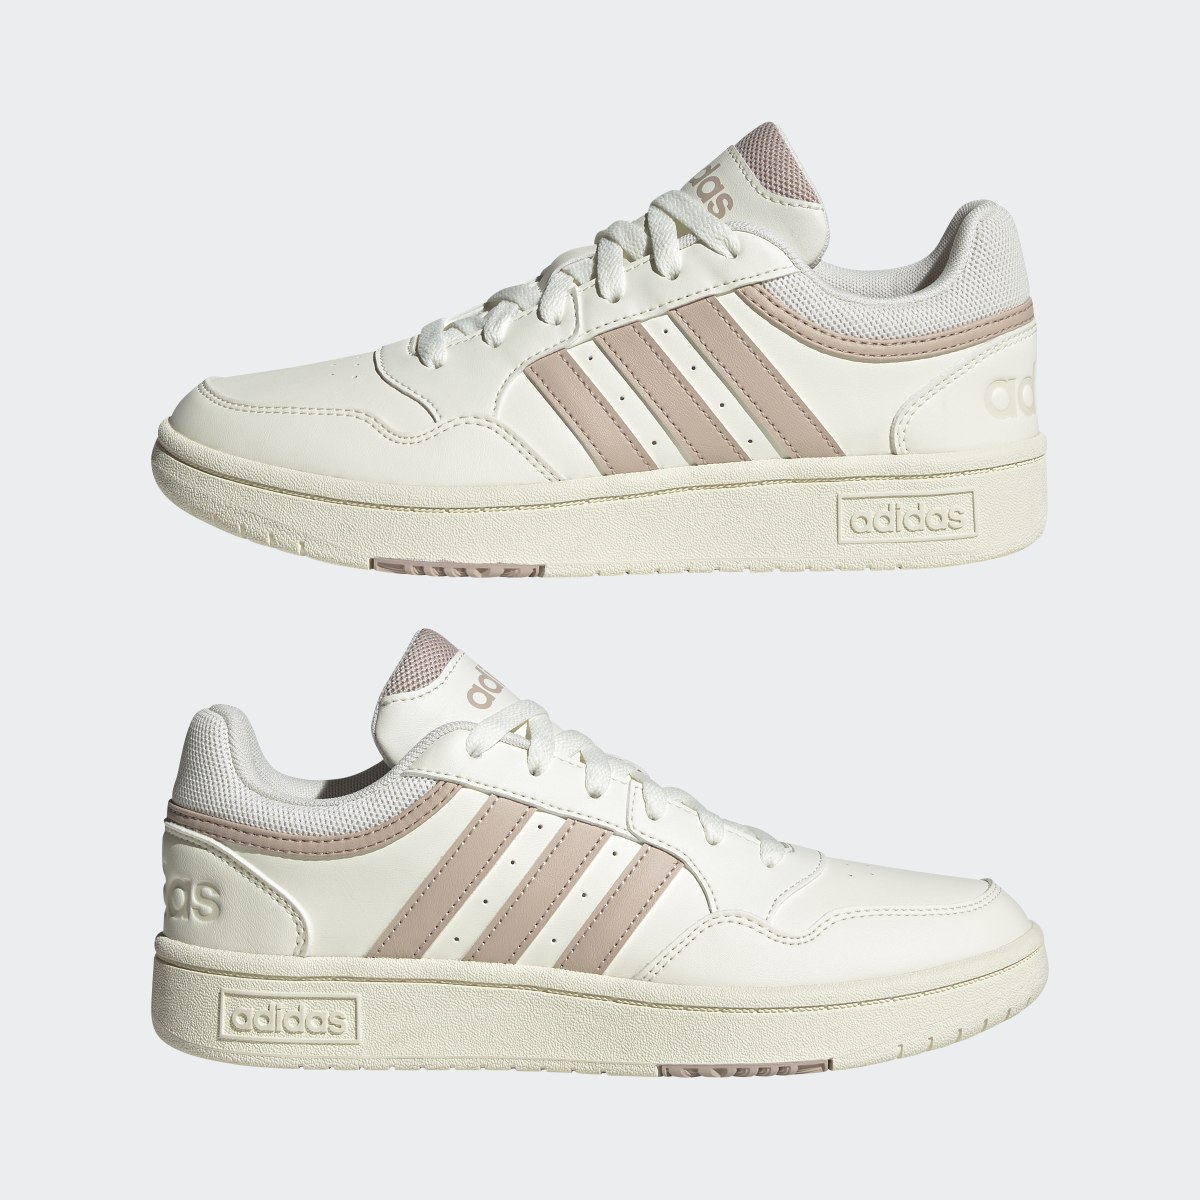 Adidas Hoops 3.0 Mid Lifestyle Basketball Low Schuh. 8